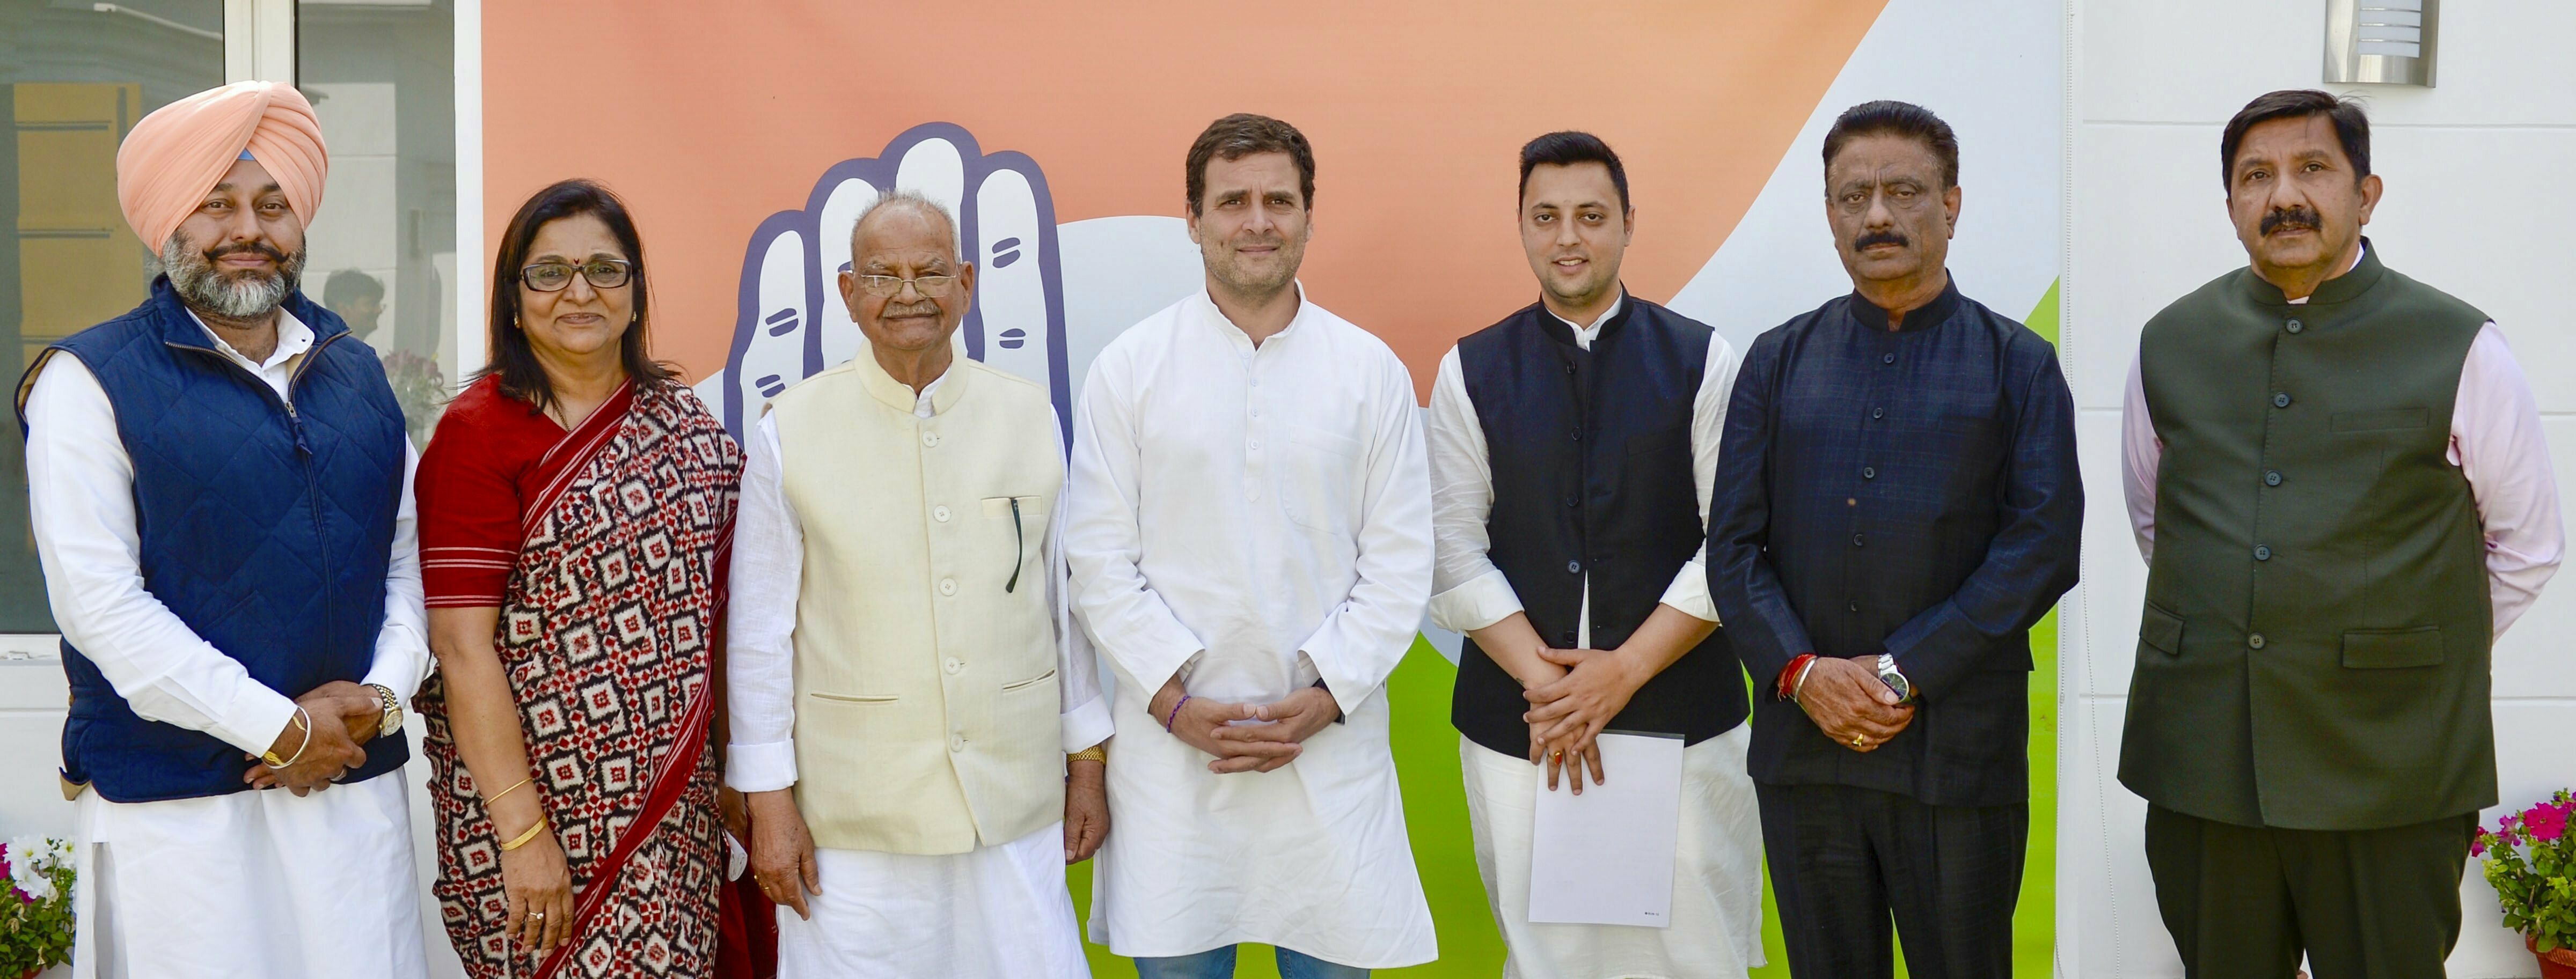 Congress President Rahul Gandhi poses for a photograph with former union telecom minister Sukh Ram and his grandson Aashray Sharma after the two joined Congress Party, in New Delhi - PTI